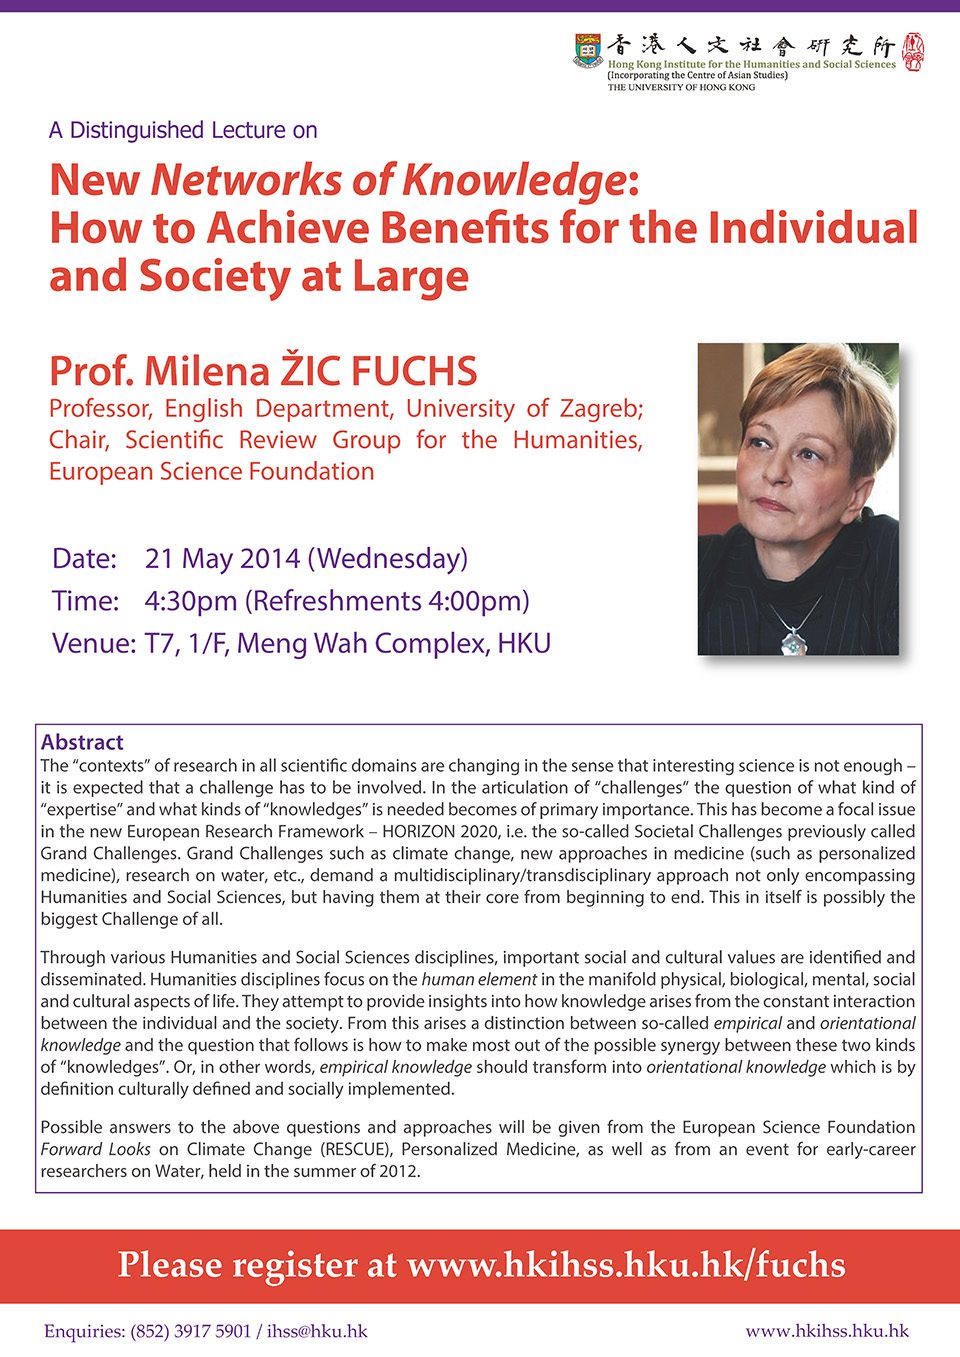 Distinguished Lecture on “New Networks of Knowledge: How to Achieve Benefits for the Individual and Society at Large” by Professor Milena Žic Fuchs (May 21, 2014)